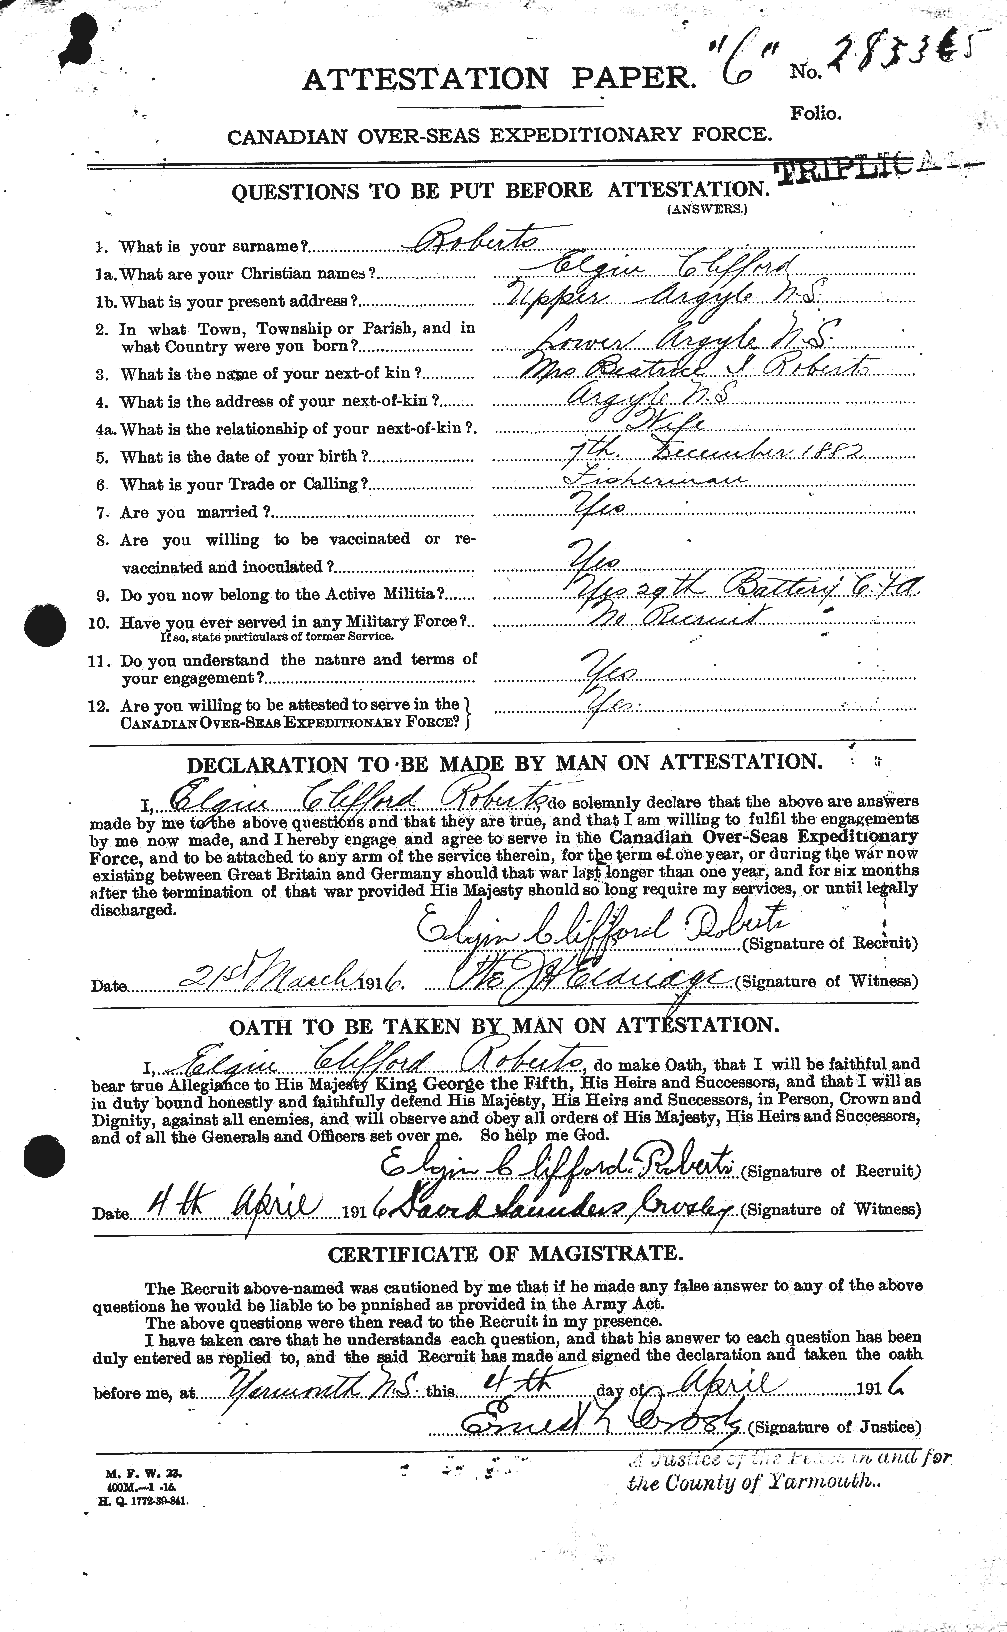 Personnel Records of the First World War - CEF 606762a